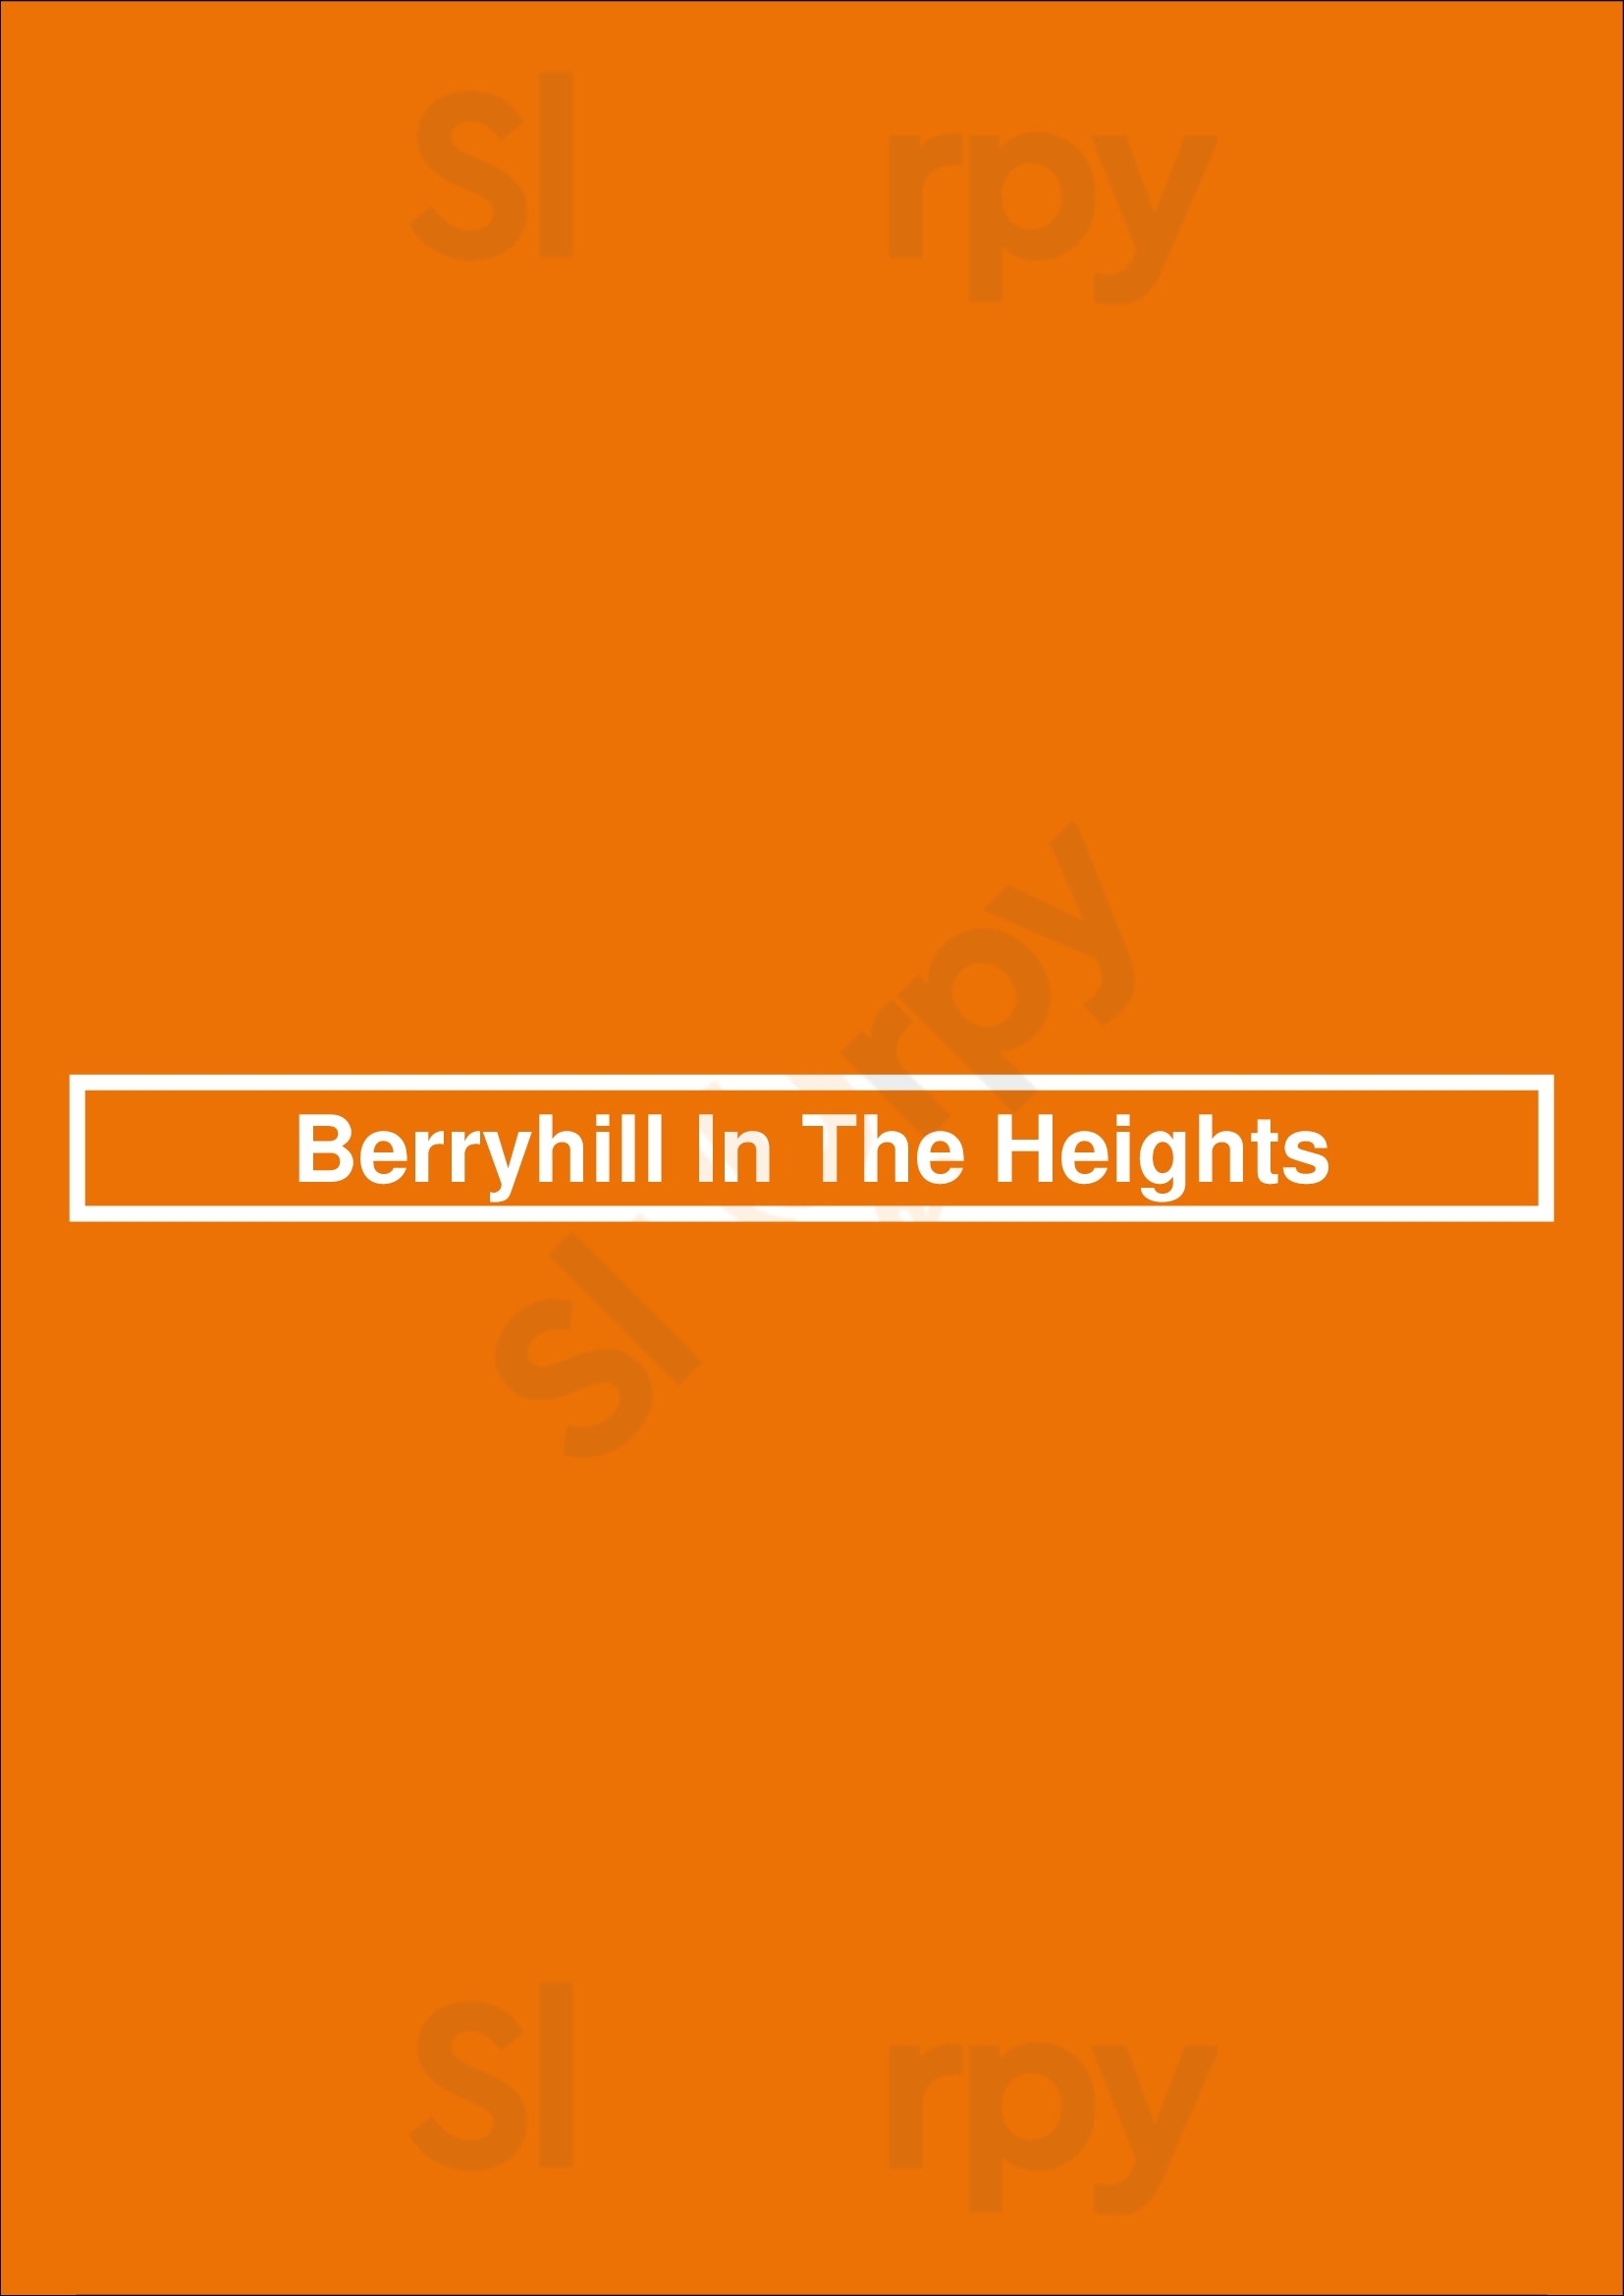 Berryhill In The Heights Houston Menu - 1